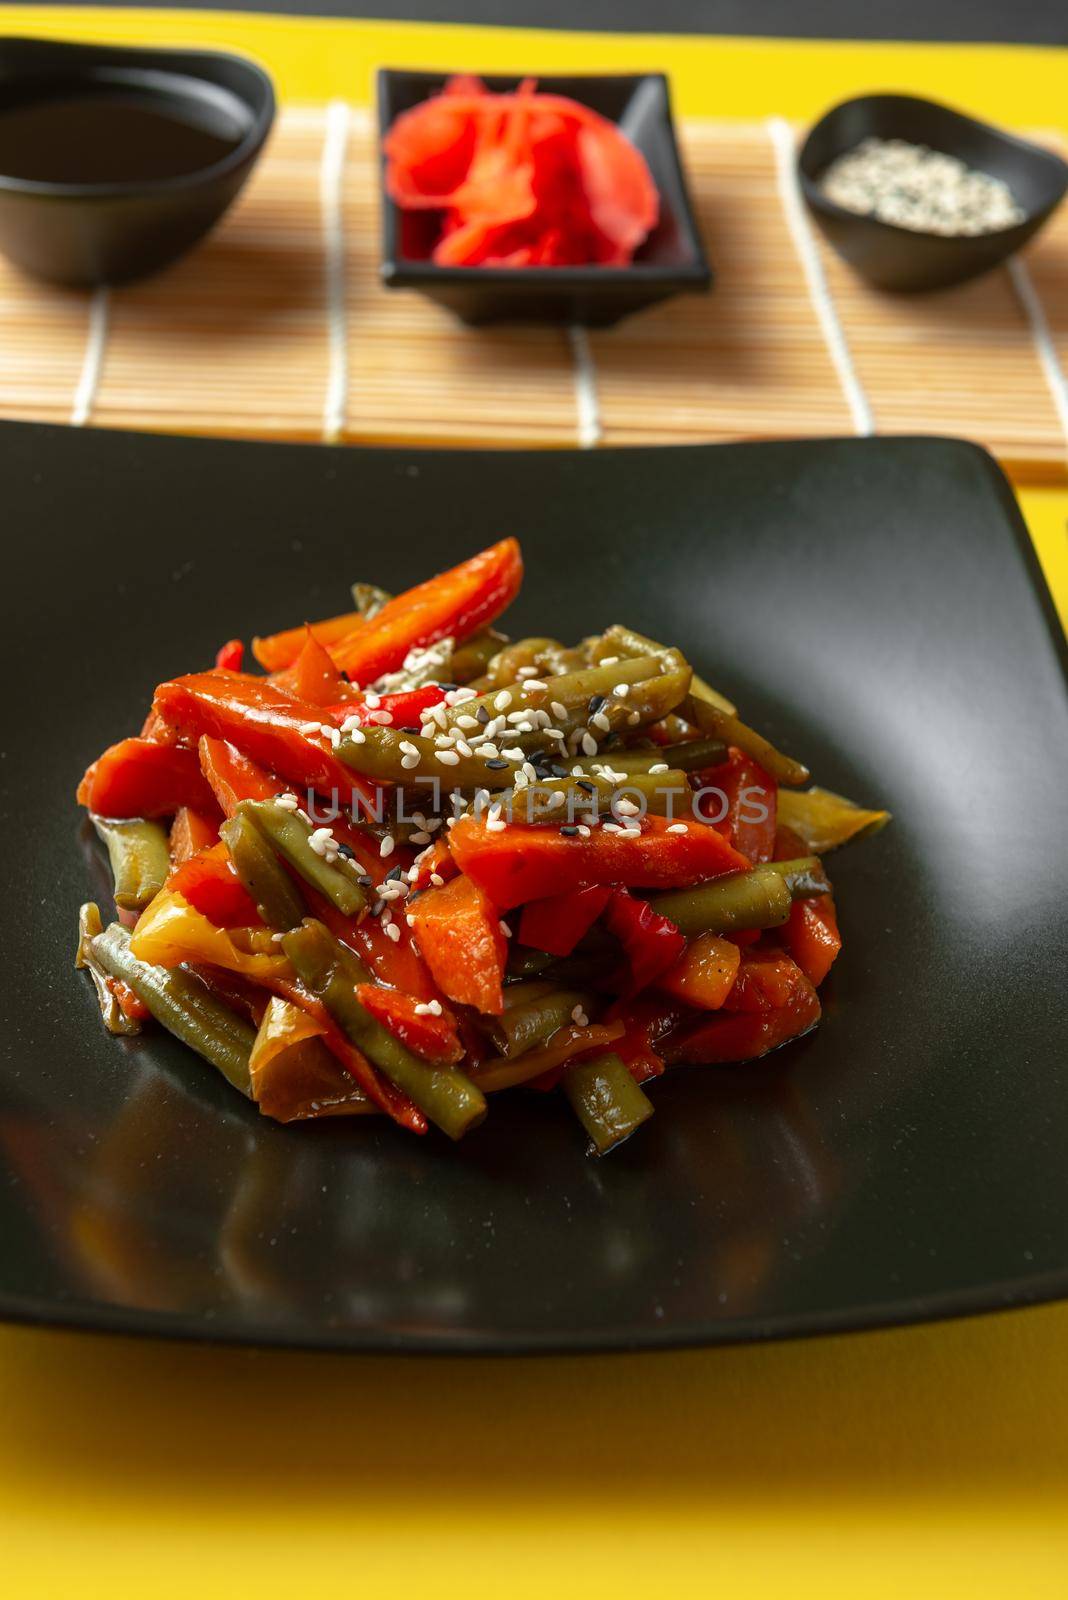 roasted vegetables in teriyaki sauce. Asian vegetables in sweet and sour sauce. Asian street food. Traditional Japanese and Chinese cuisine. Thai vegetables fried in sauce on a bright yellow background.